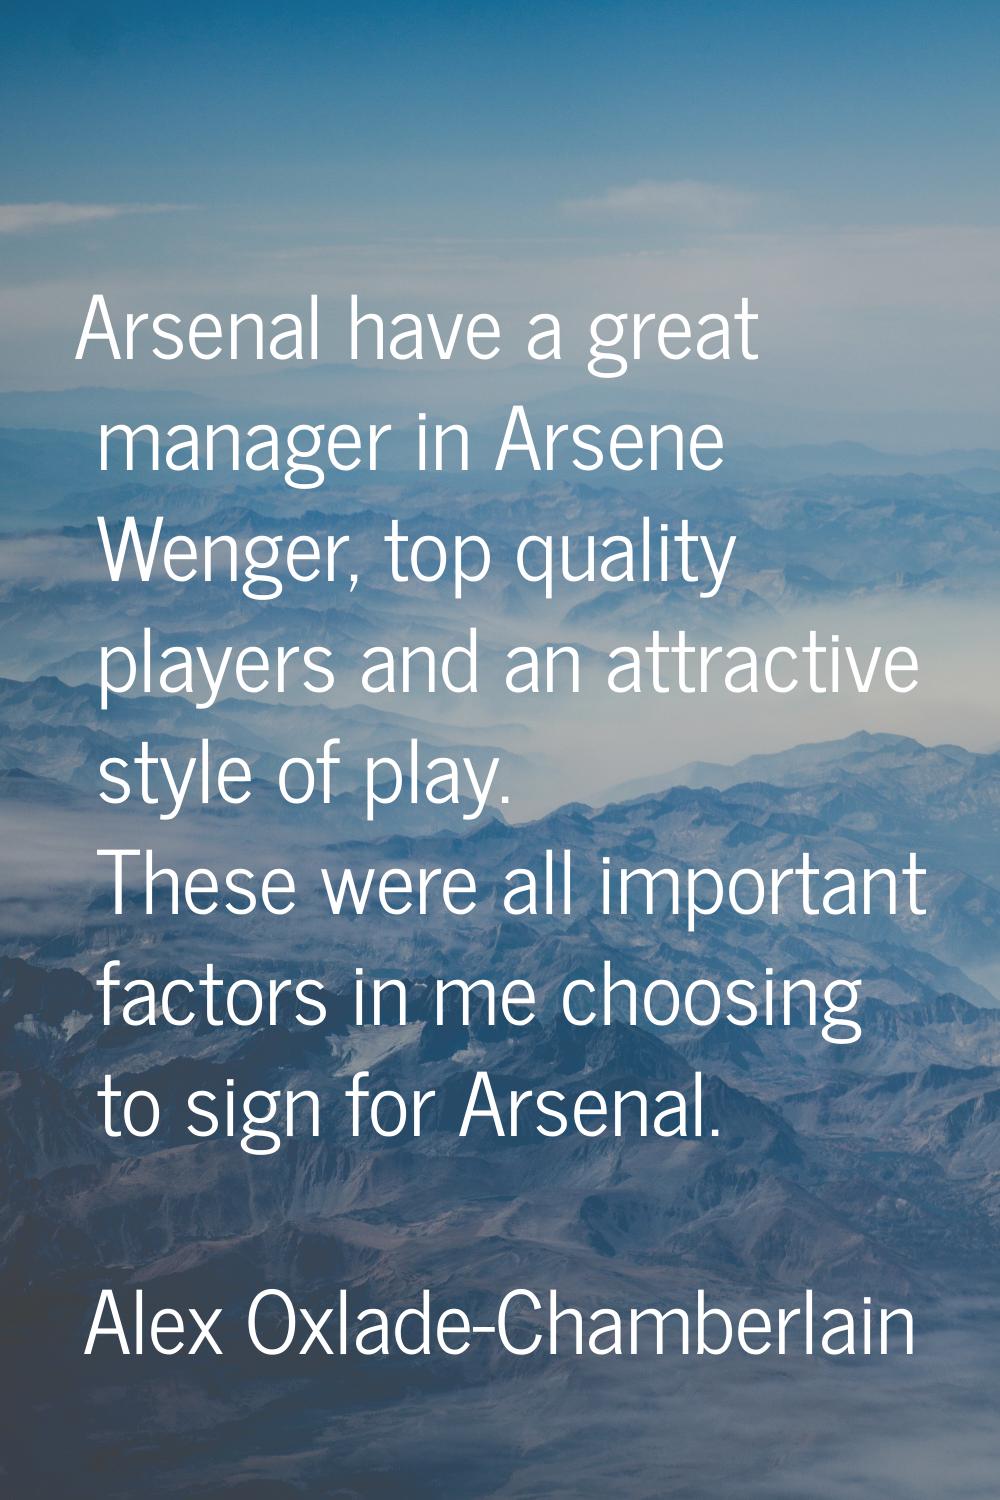 Arsenal have a great manager in Arsene Wenger, top quality players and an attractive style of play.